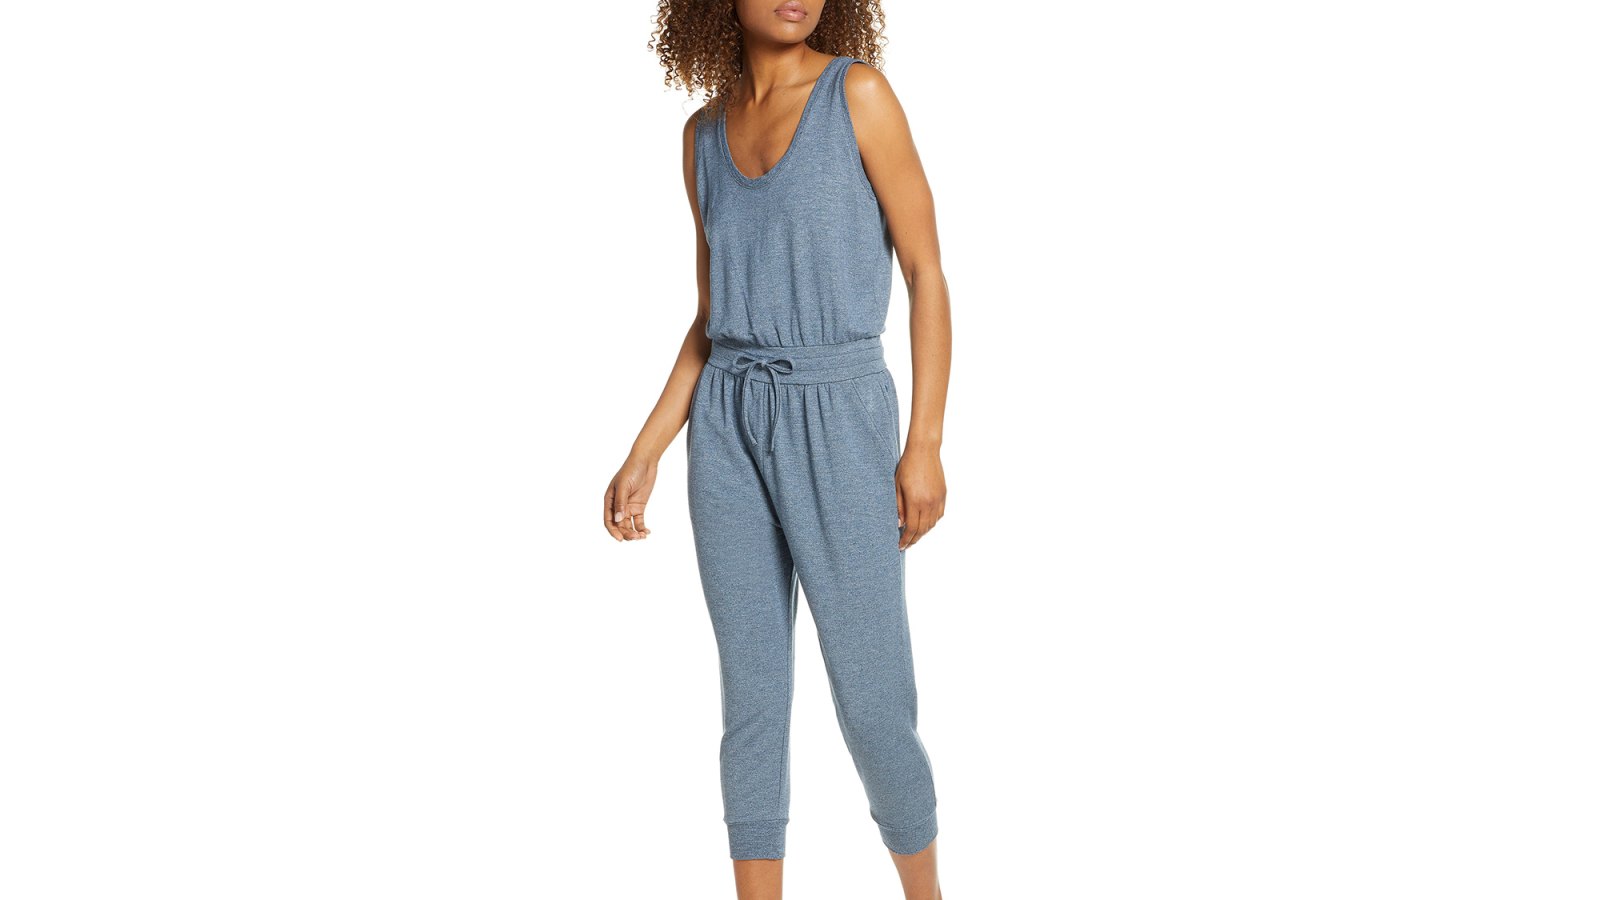 Zella All in One Jumpsuit